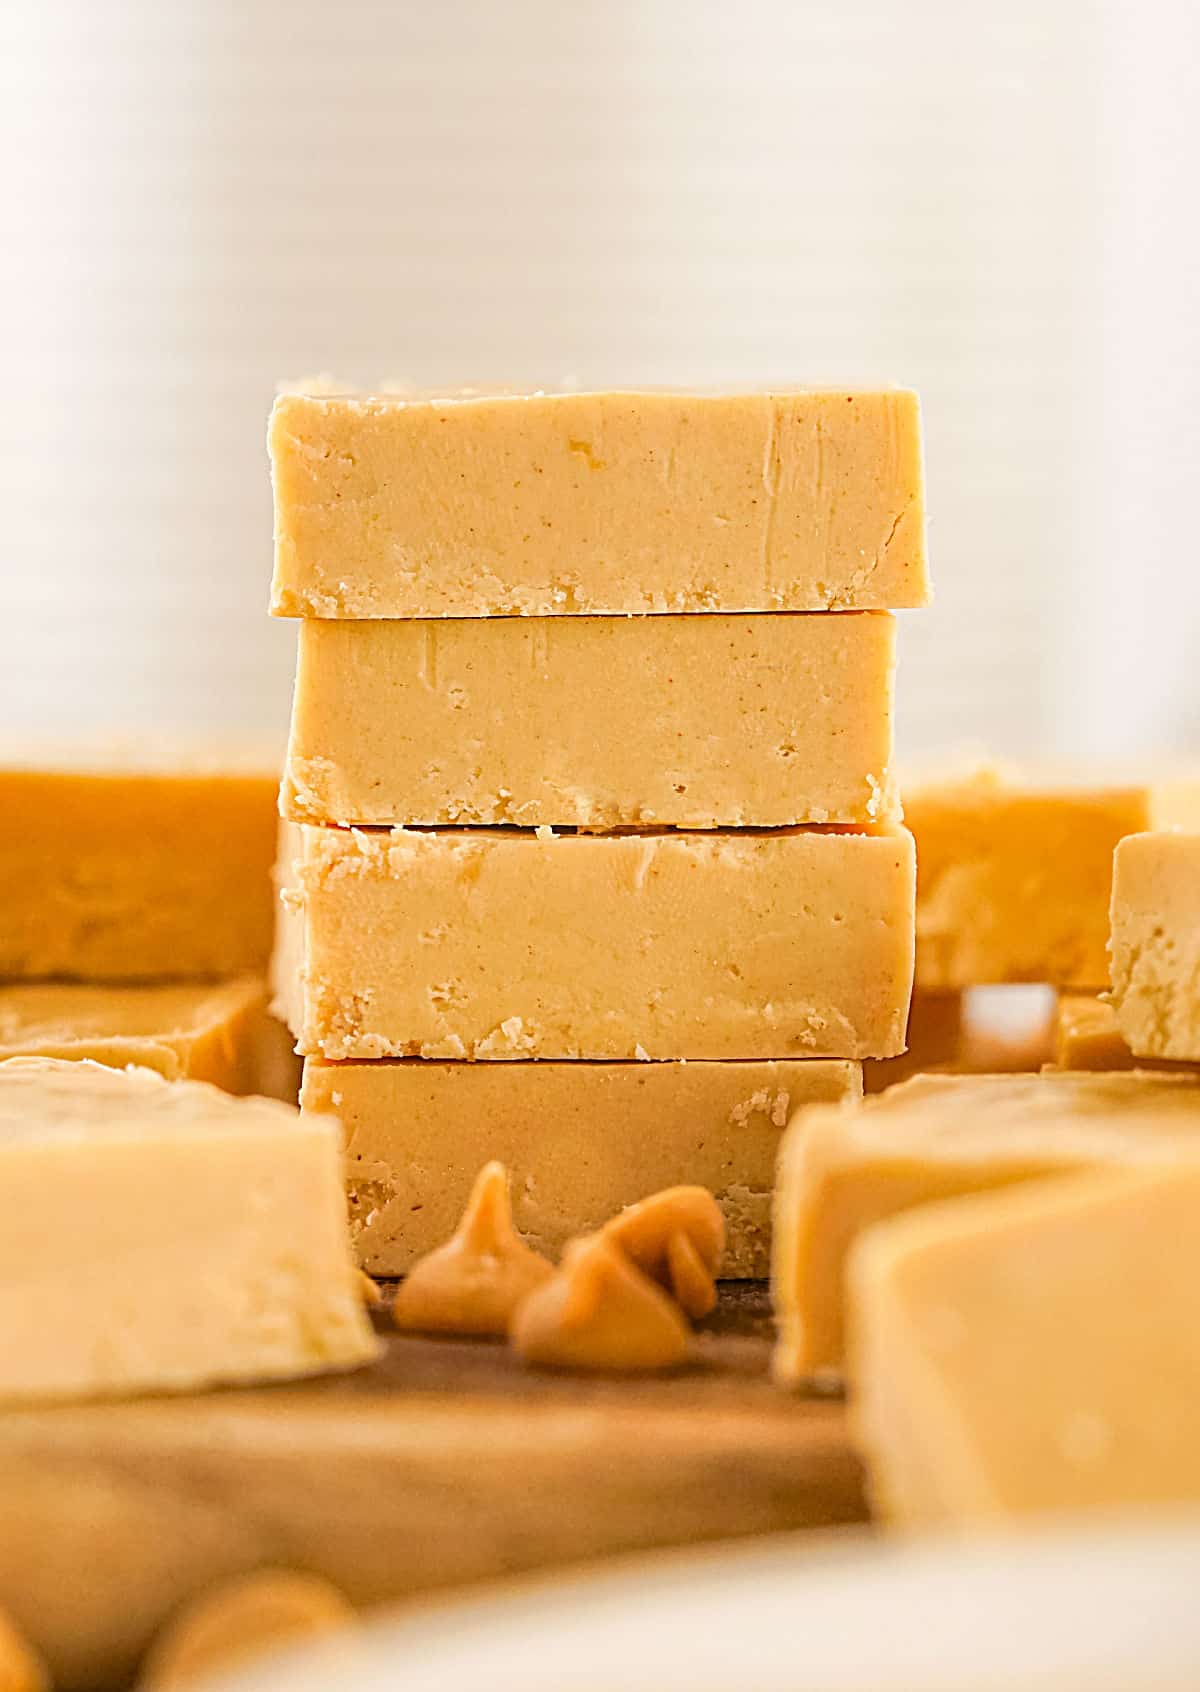 Stack of four peanut butter fudge pieces on a wooden surface. More squares around. White background.